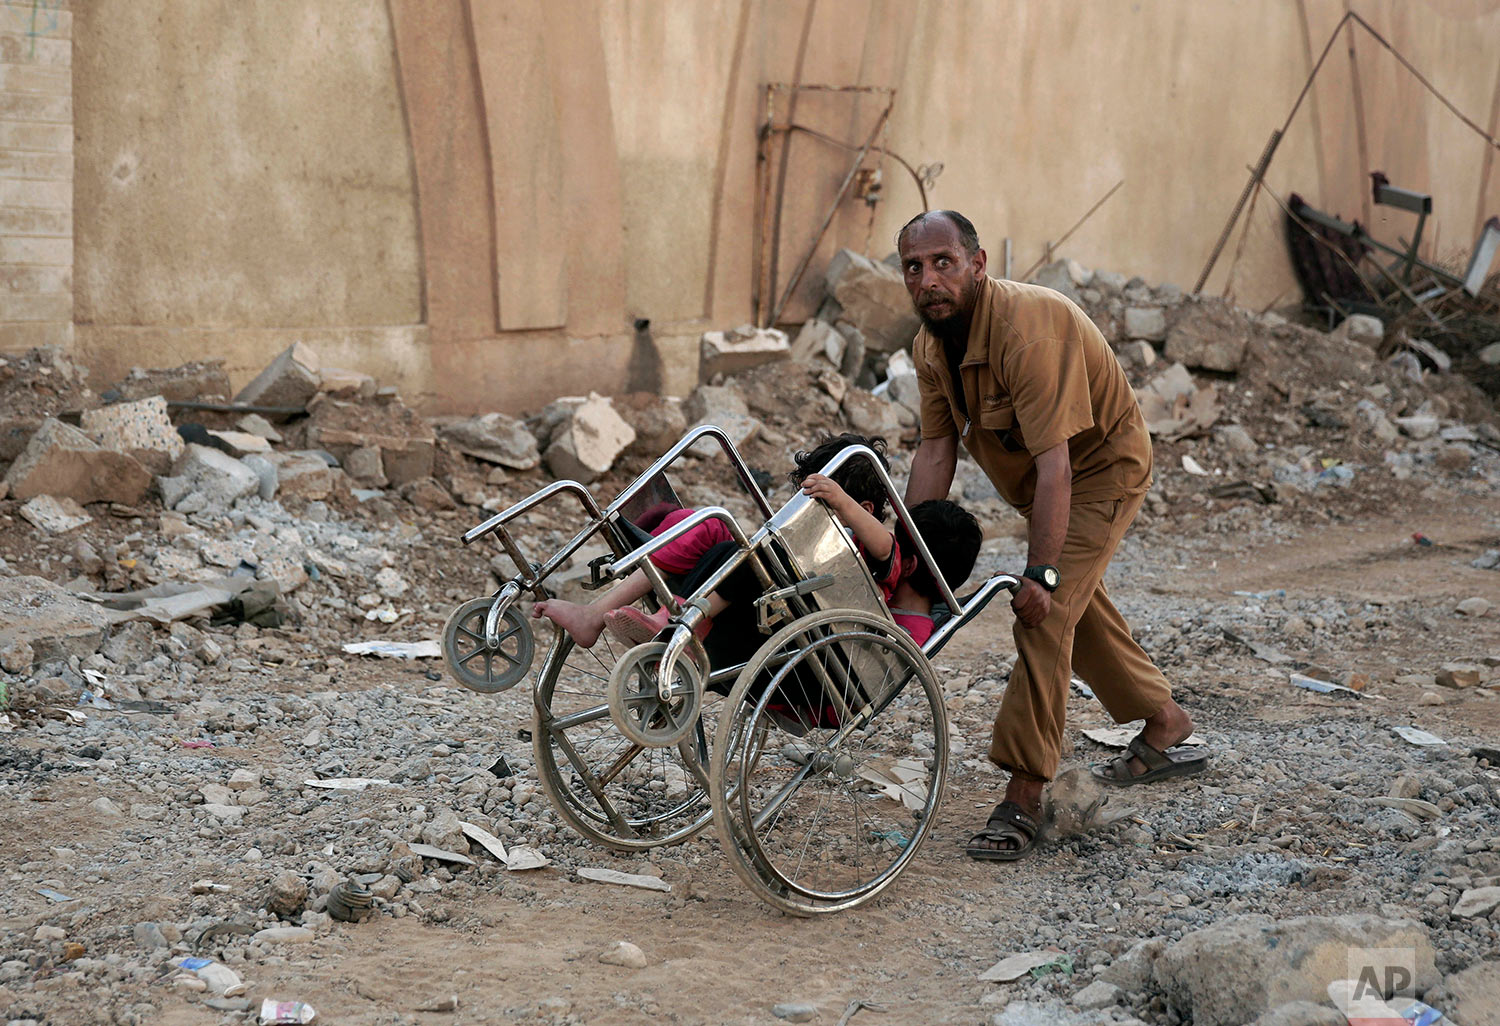  A man pushes two children in a wheelchair as they flee heavy fighting between Islamic State militants and Iraqi special forces in Mosul, Iraq, Wednesday, May 10, 2017. (AP Photo/Maya Alleruzzo) 